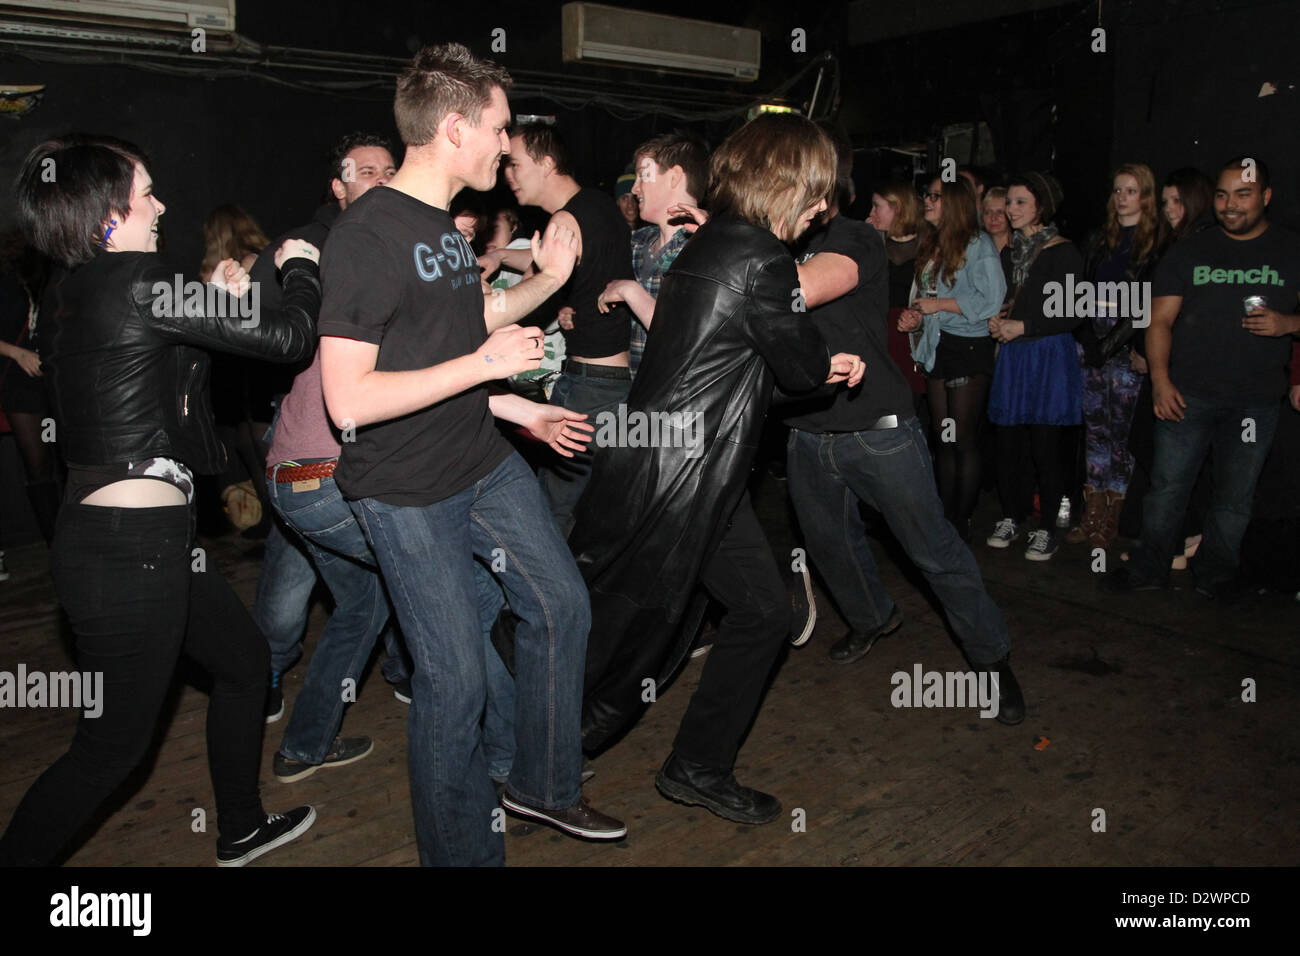 Guys in the mosh pit, Bristol based band AWMR playing at The Croft in Bristol. Stock Photo